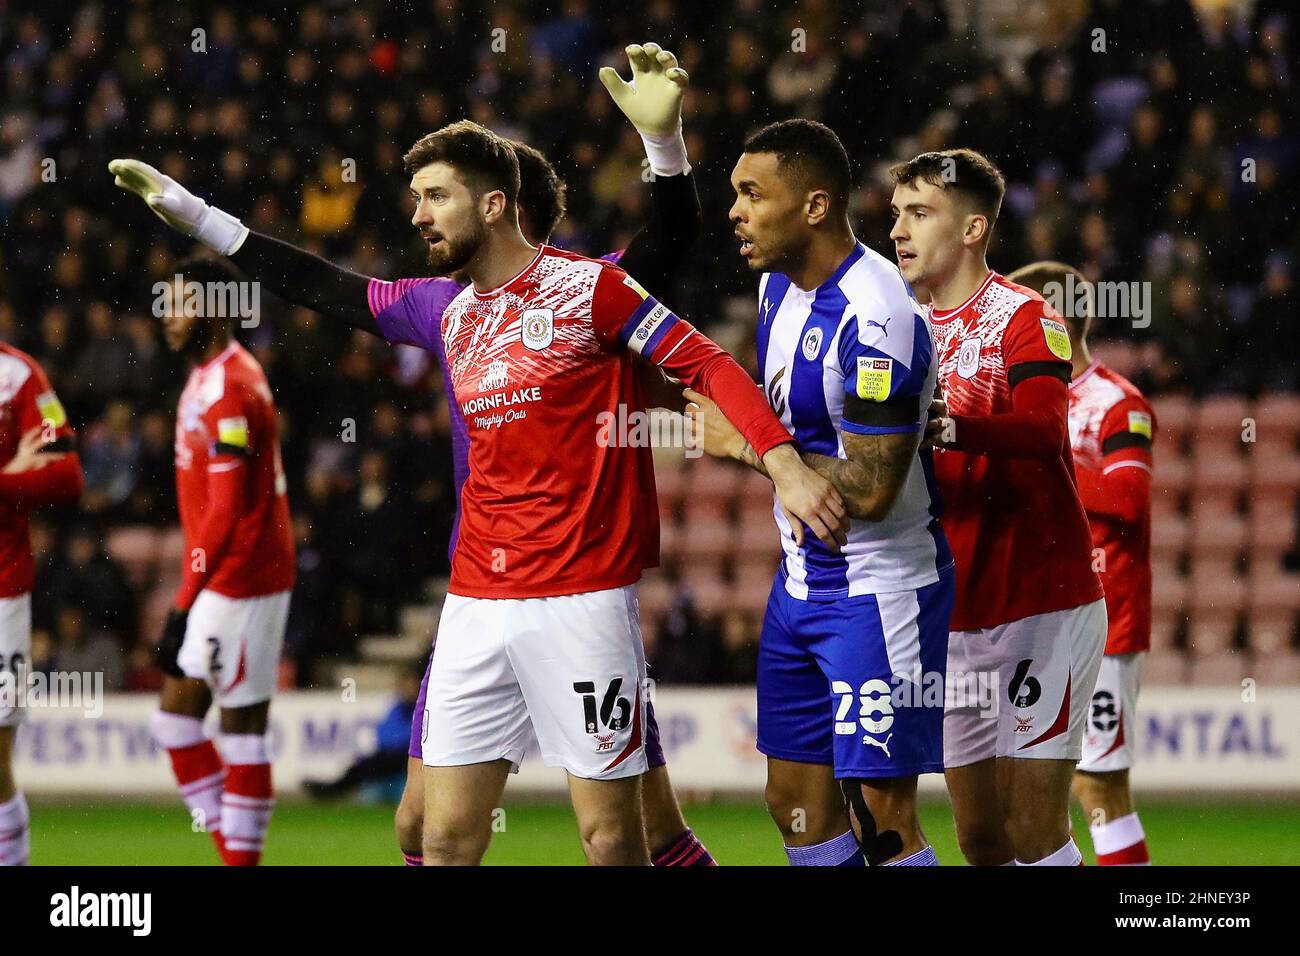 Wigan, UK. 15th Feb, 2022. Luke Murphy of Crewe Alexandra during the Sky Bet League One match between Wigan Athletic and Crewe Alexandra at DW Stadium on February 15th 2022 in Wigan, England. (Photo by Tony Taylor/phcimages.com) Credit: PHC Images/Alamy Live News Stock Photo